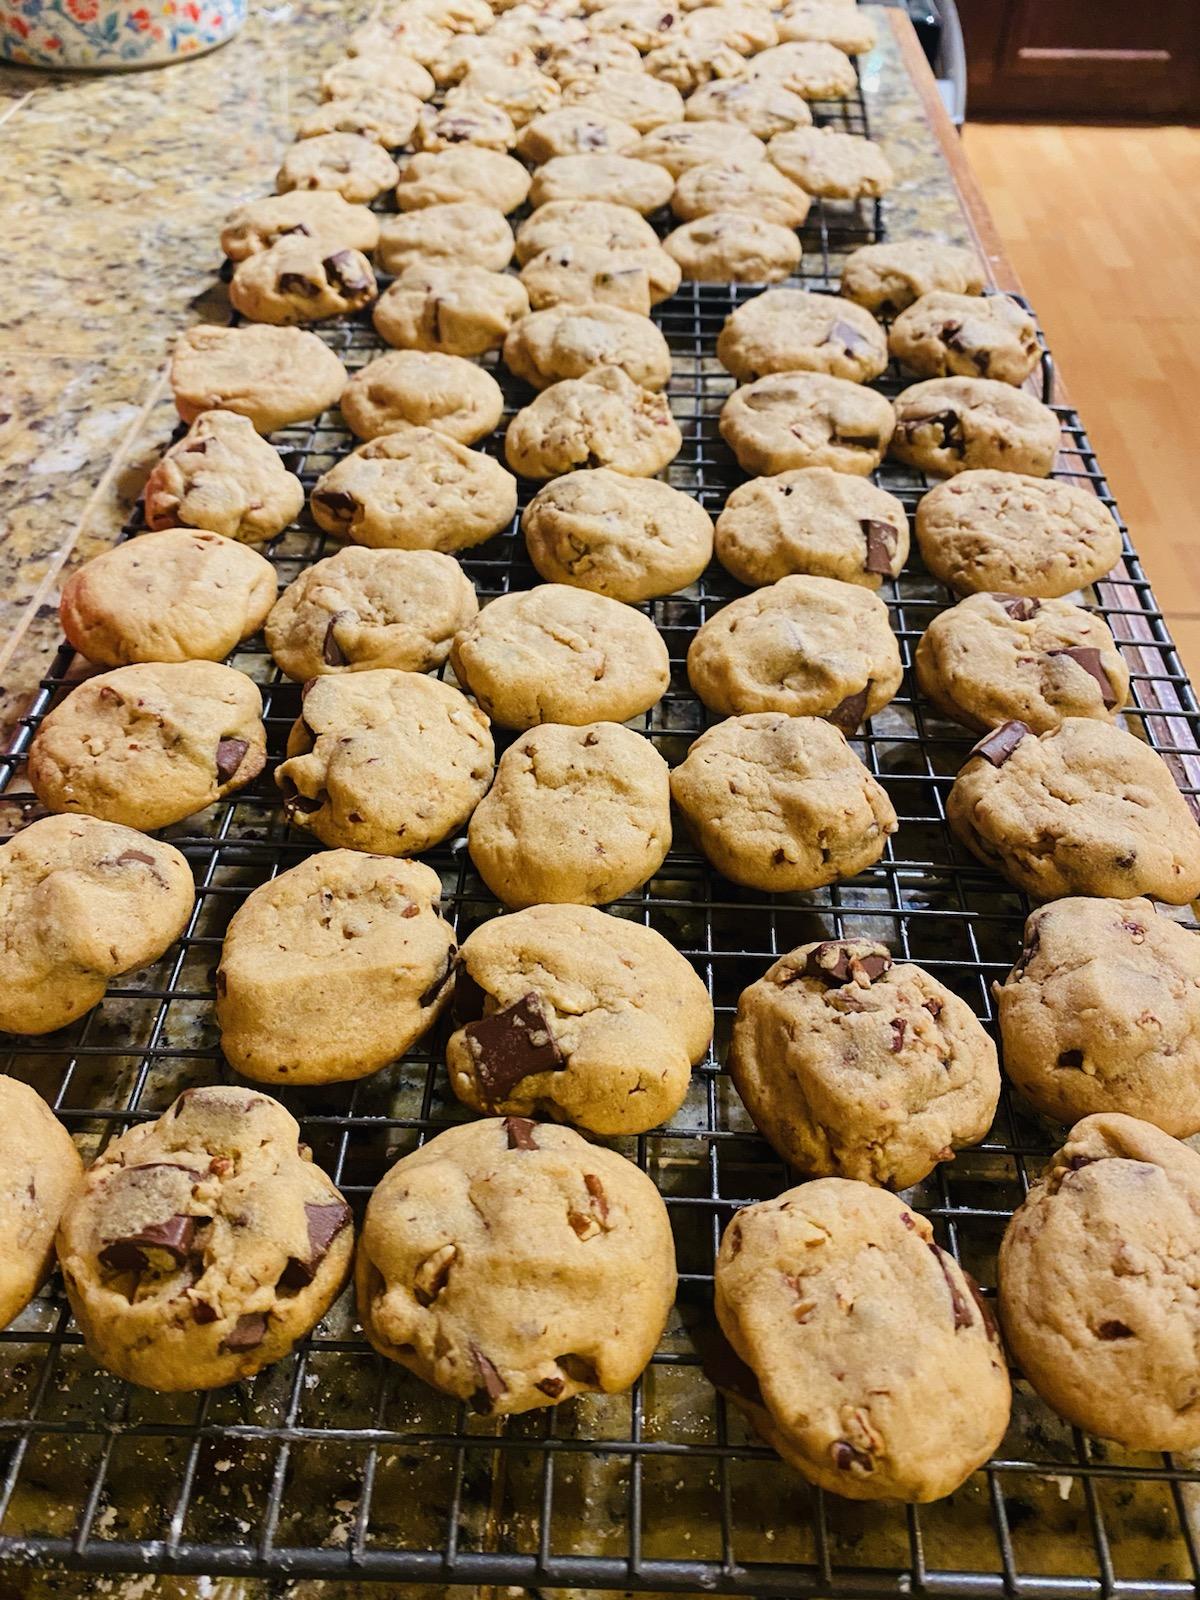 I also make cookies!